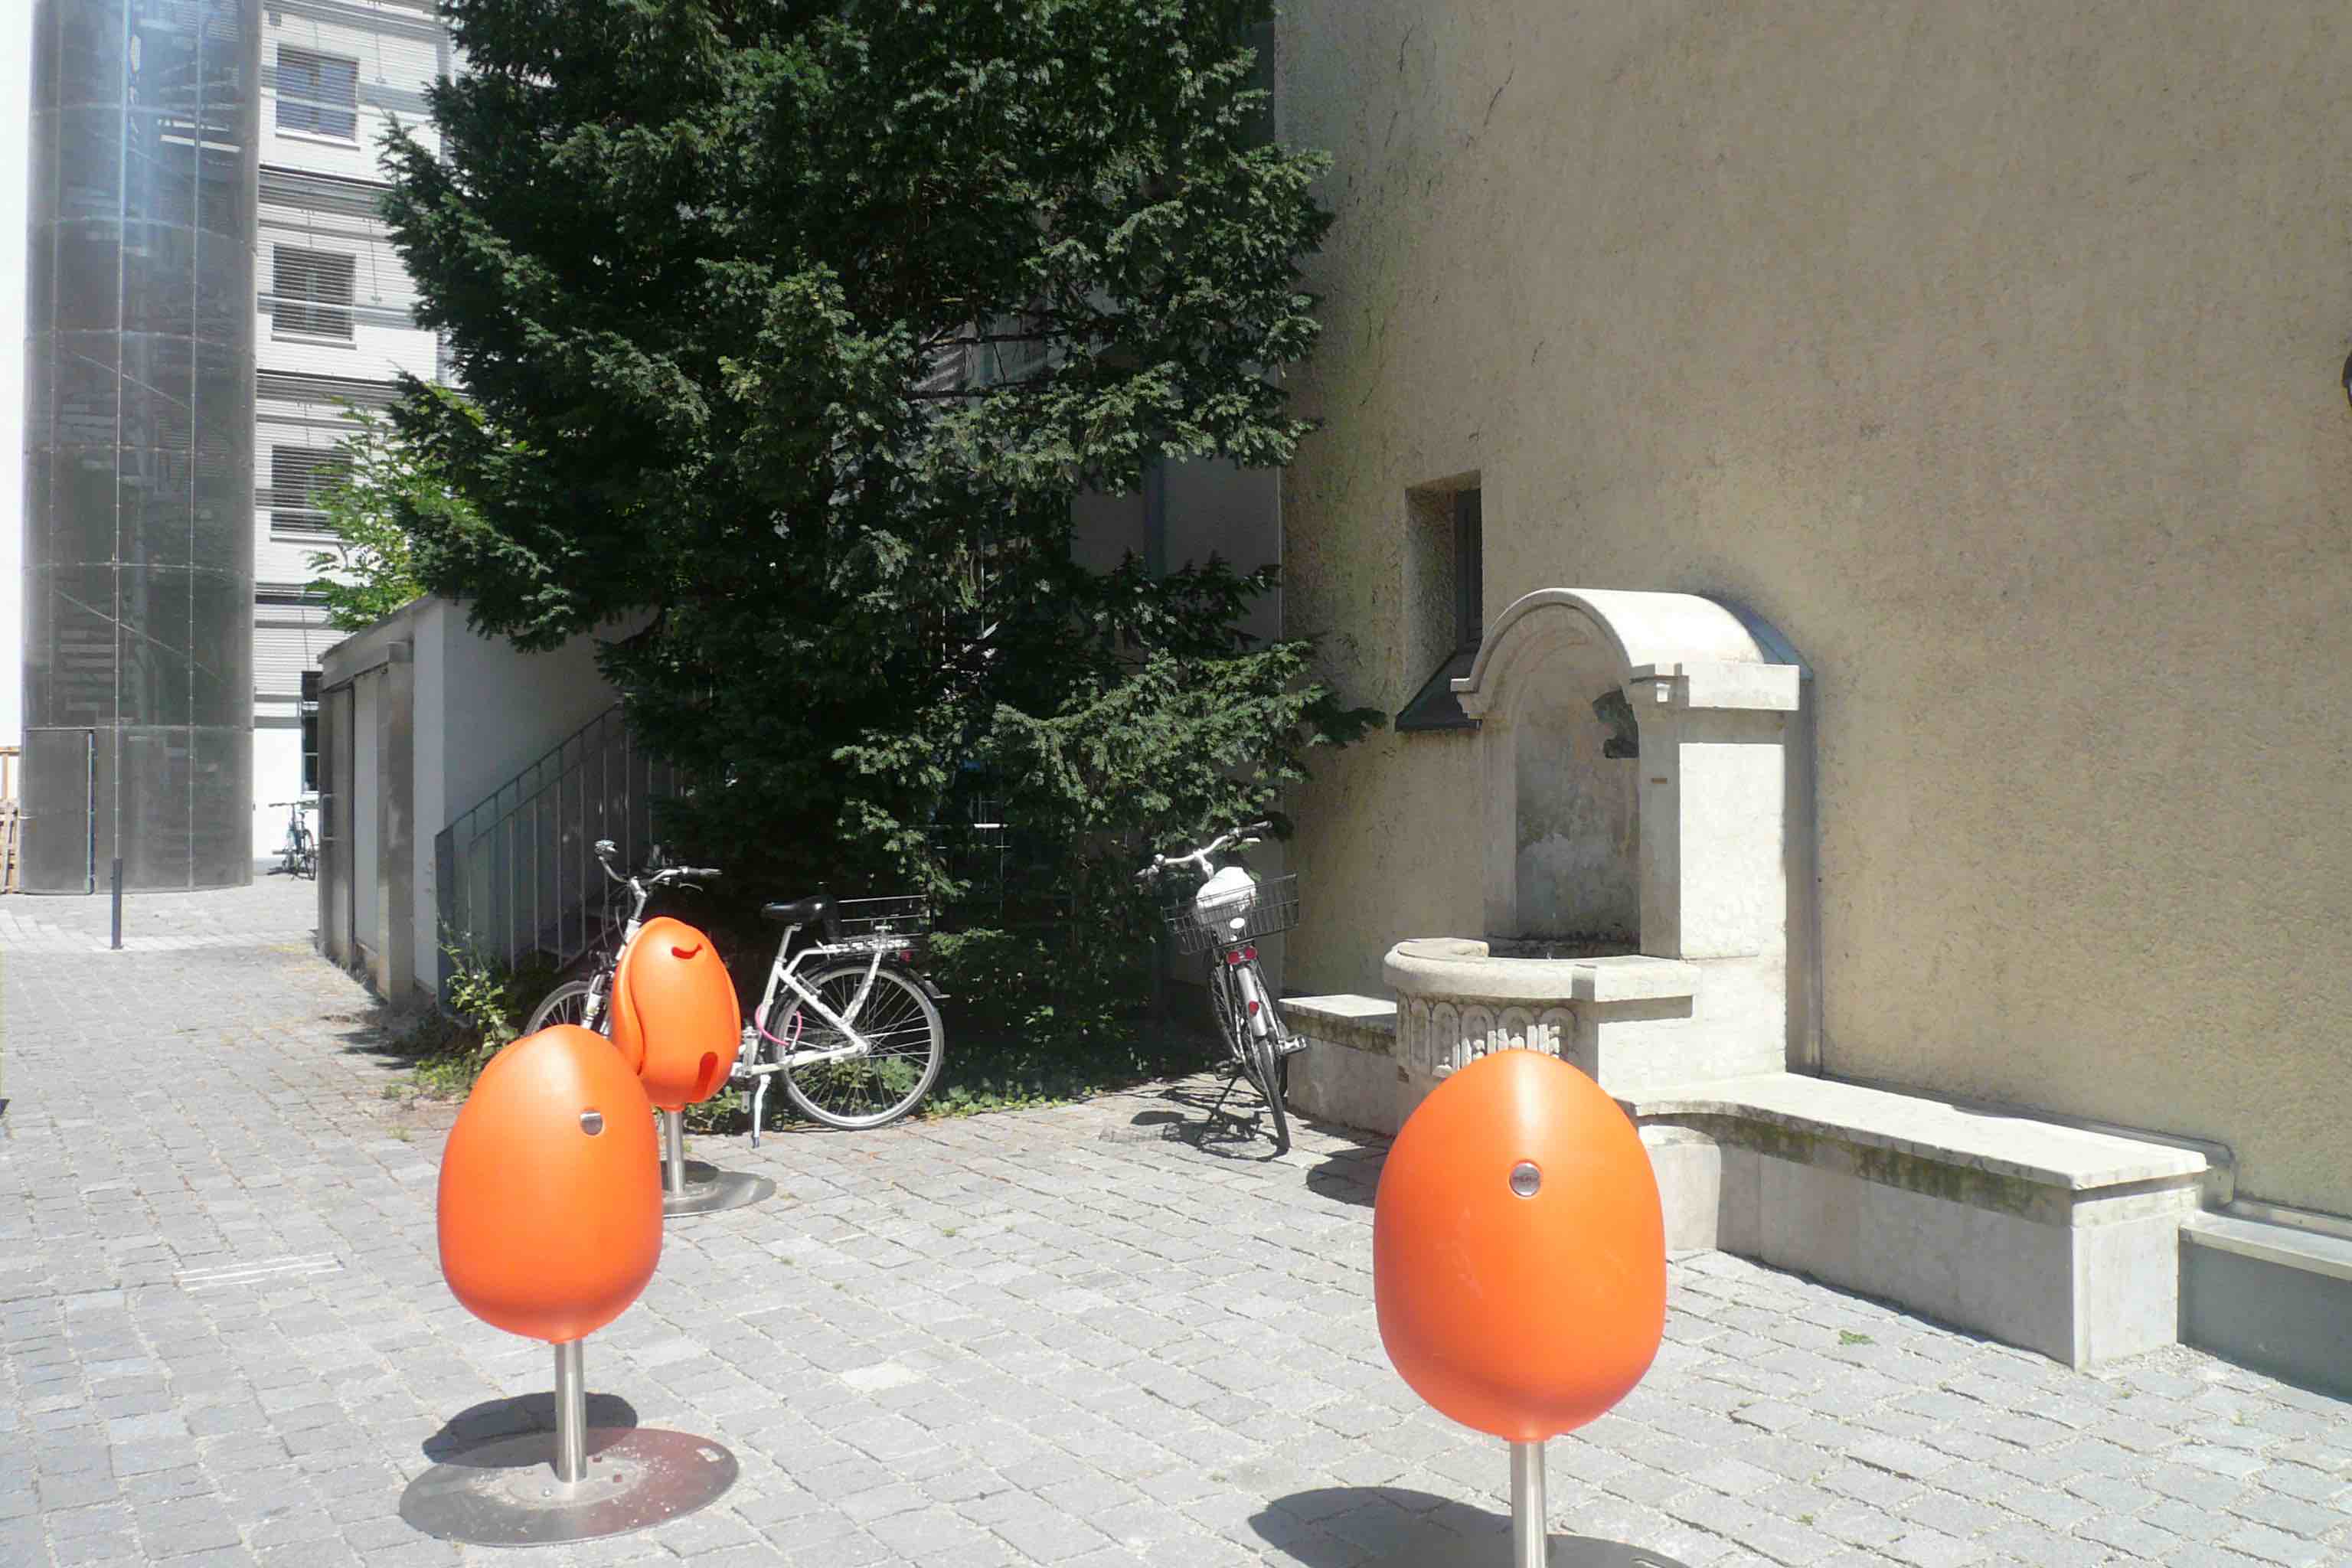 Foldable tulip chairs closed to Sankt-Jakobs-Platz